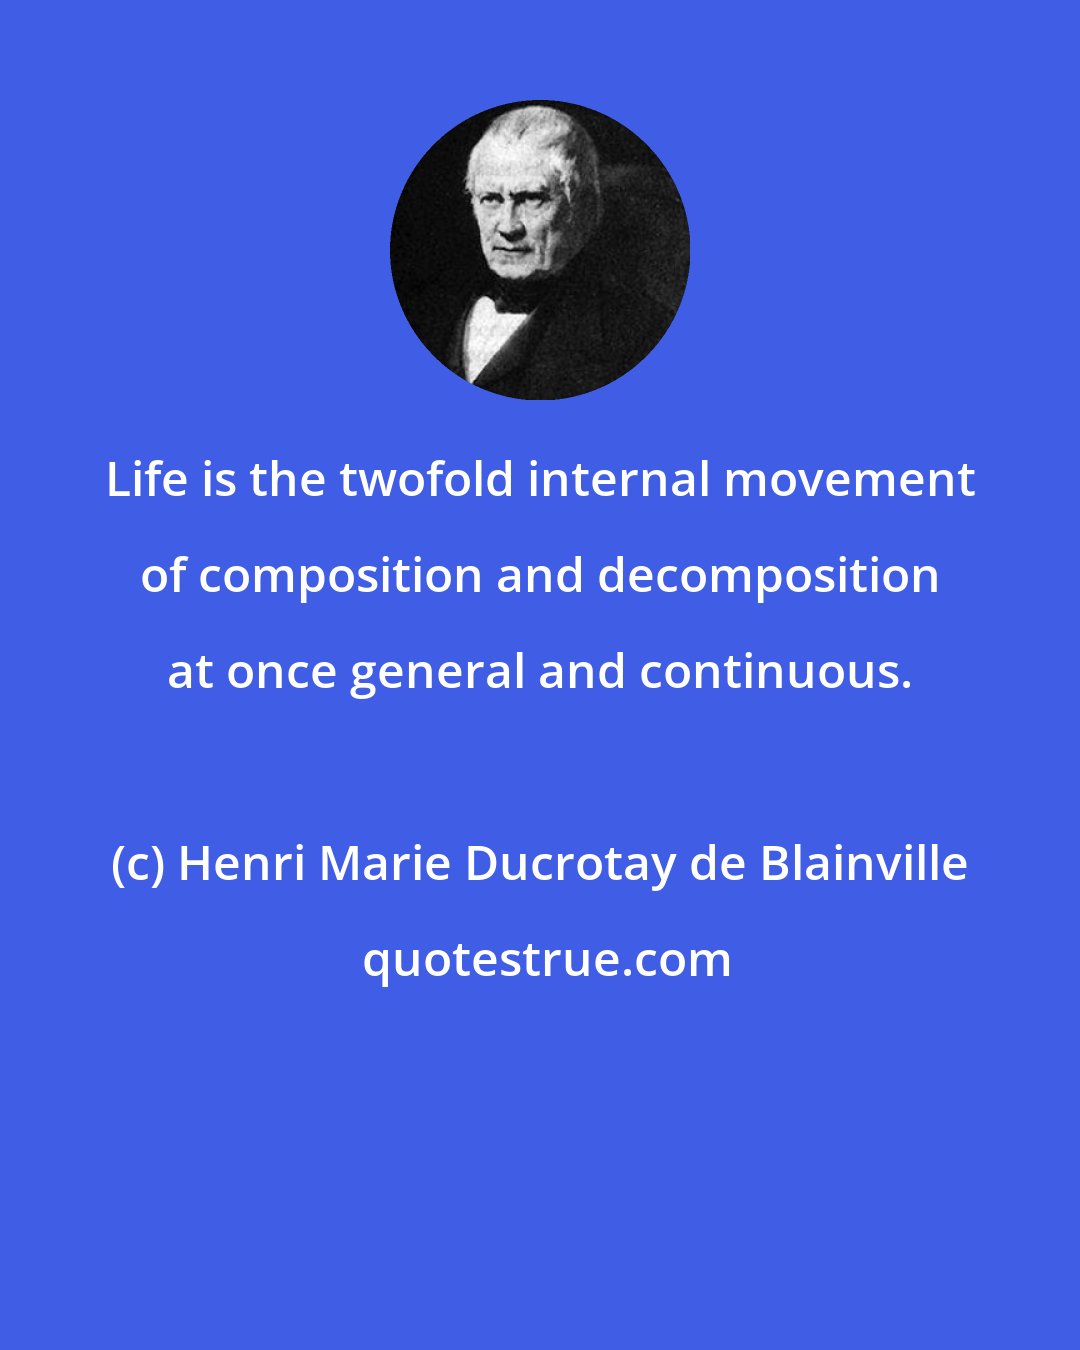 Henri Marie Ducrotay de Blainville: Life is the twofold internal movement of composition and decomposition at once general and continuous.